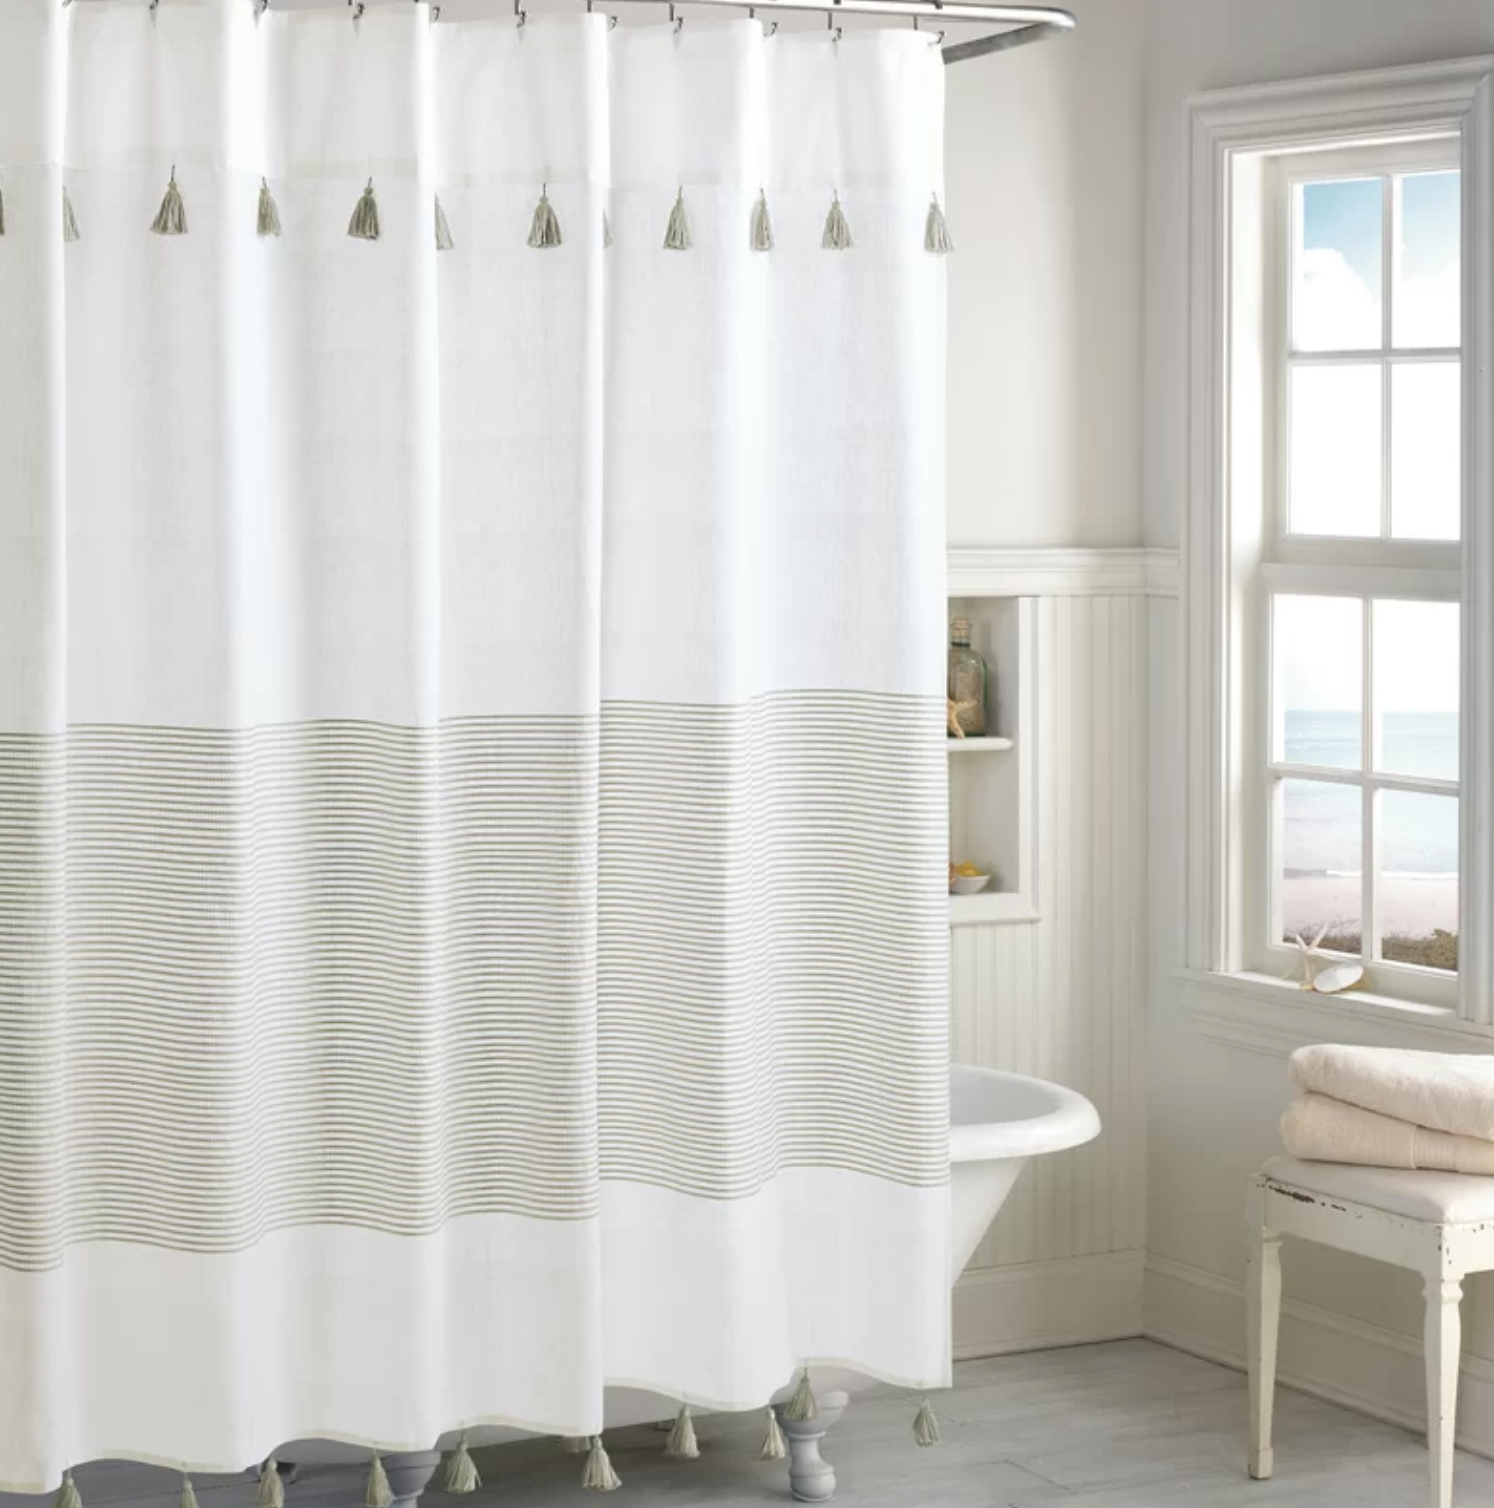 A striped cotton shower curtain with black tassels